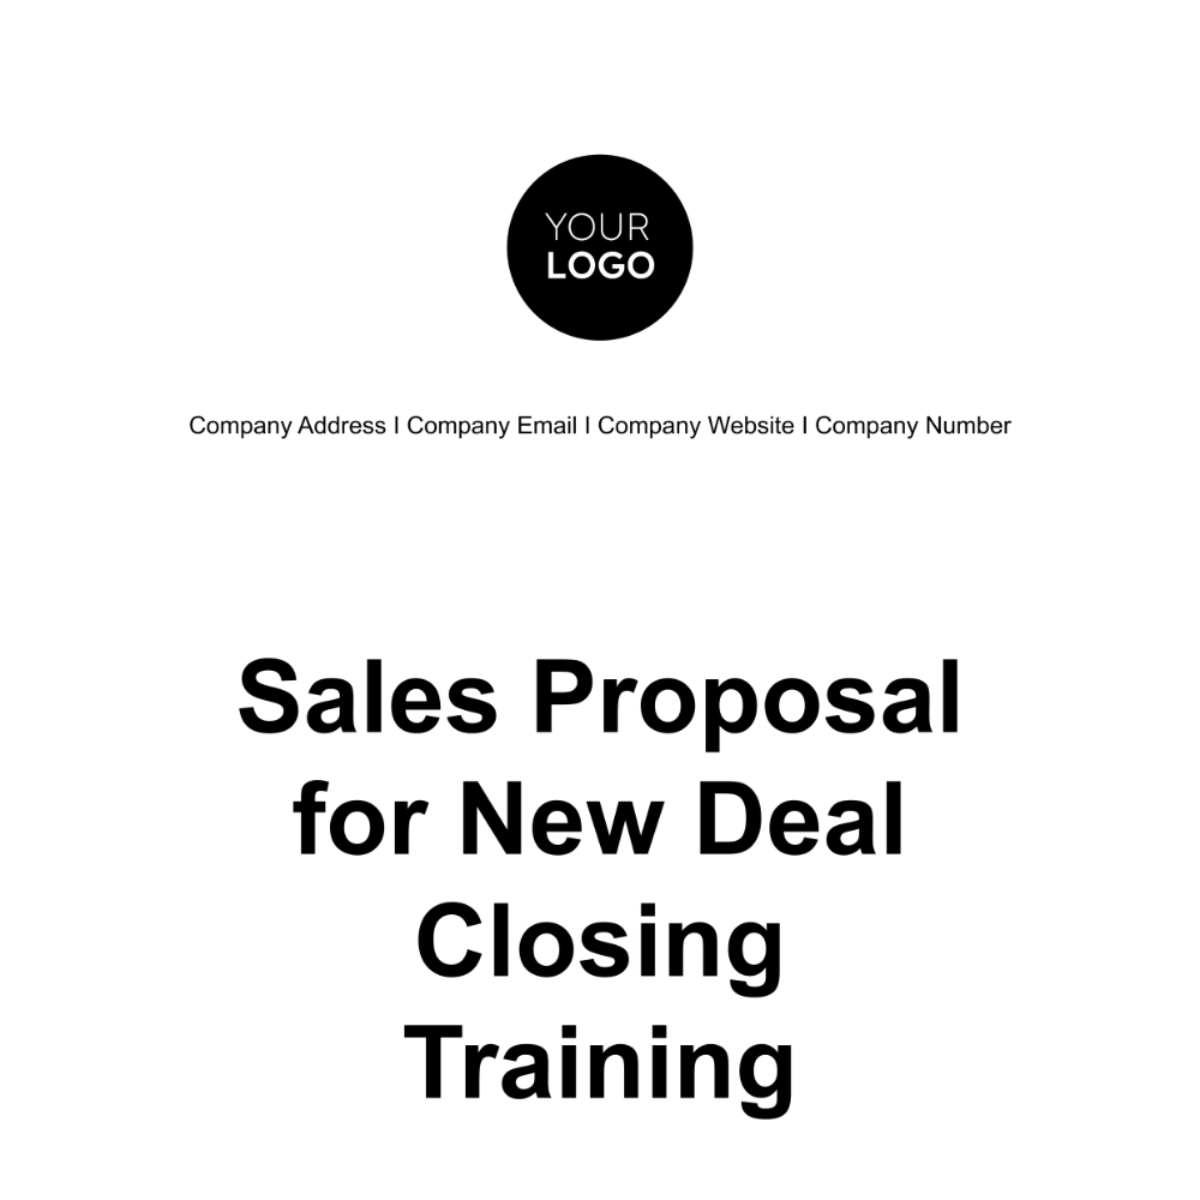 Free Sales Proposal for New Deal Closing Training Template